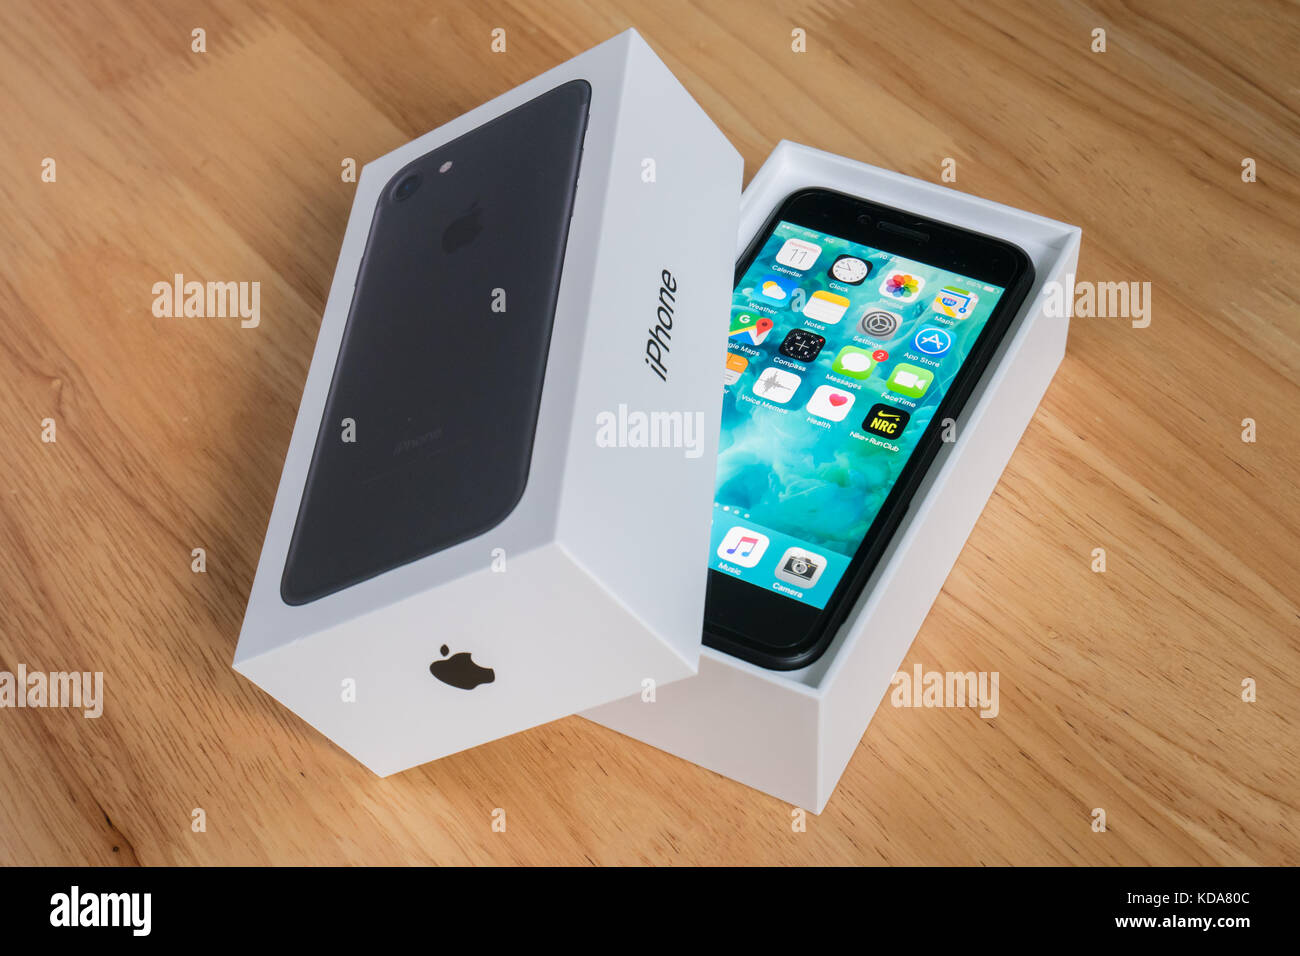 Iphone Box High Resolution Stock Photography and Images - Alamy